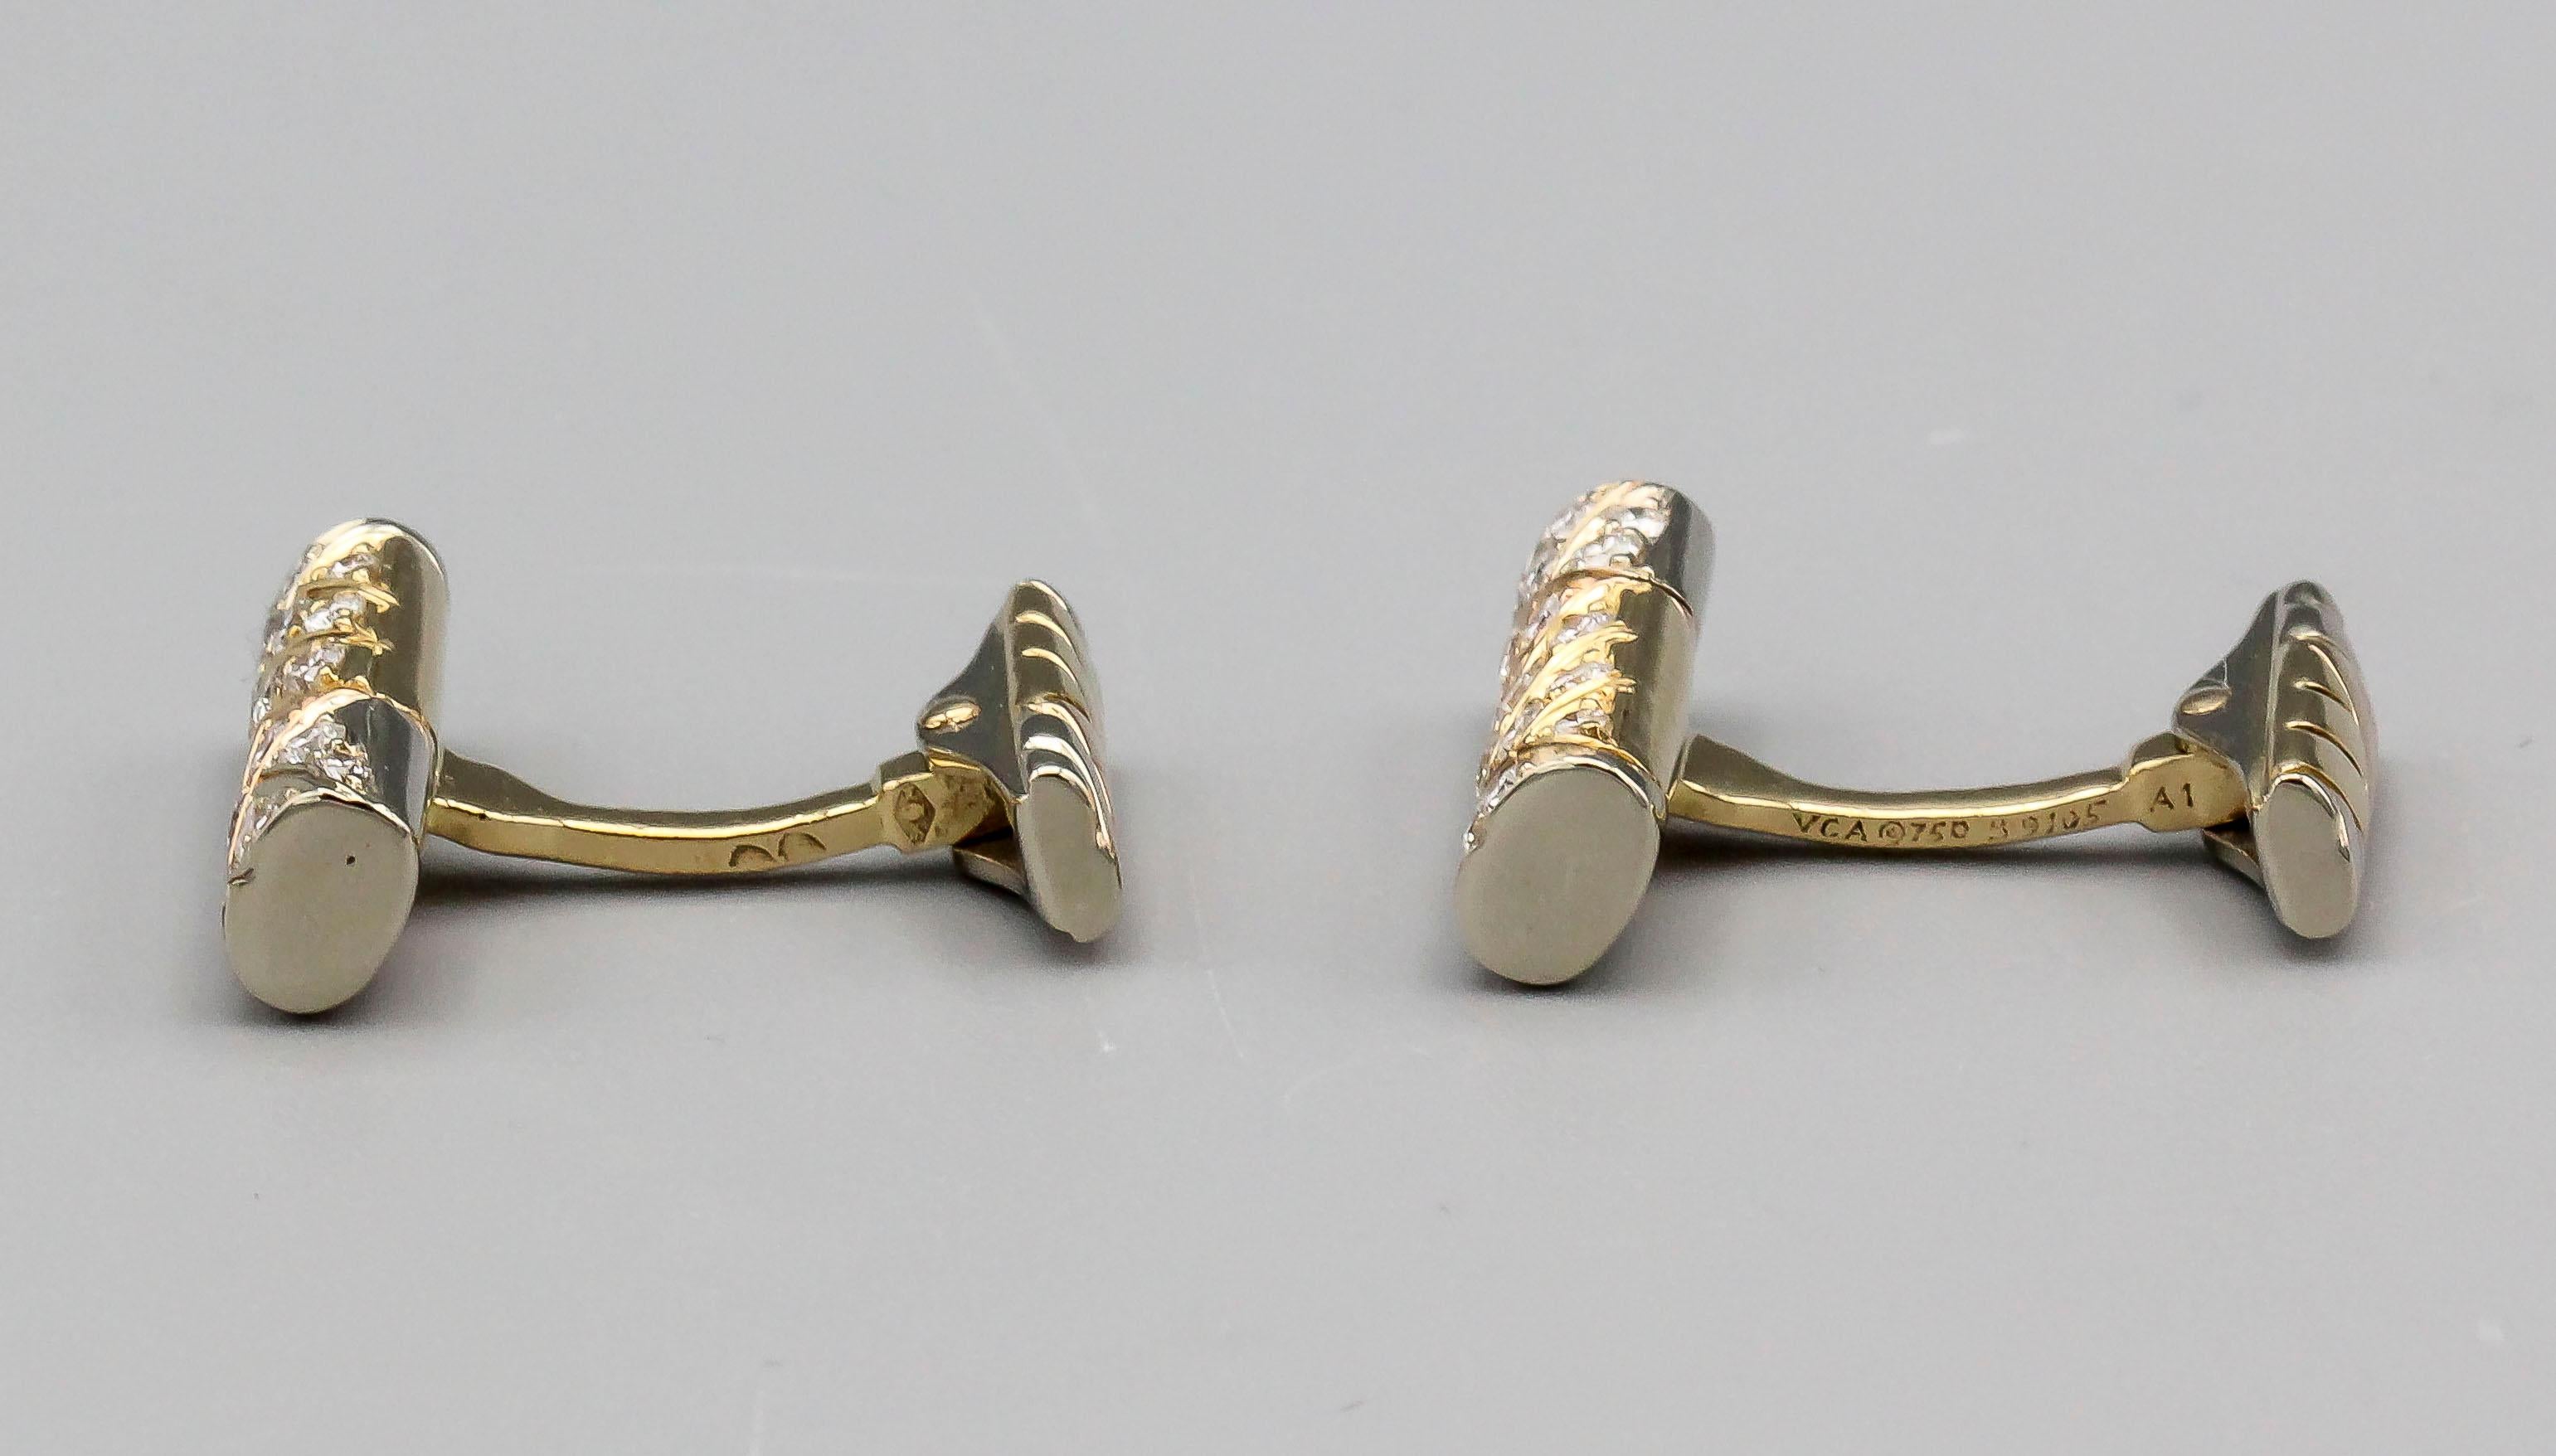 Fine pair of diamond and 18K 2-tone gold bar cufflinks by Van Cleef & Arpels, circa 1980s. They feature high grade round brilliant cut diamonds of 1.10 carats total weight, as marked on the cufflinks, moreover, the cufflinks are made in 18k white